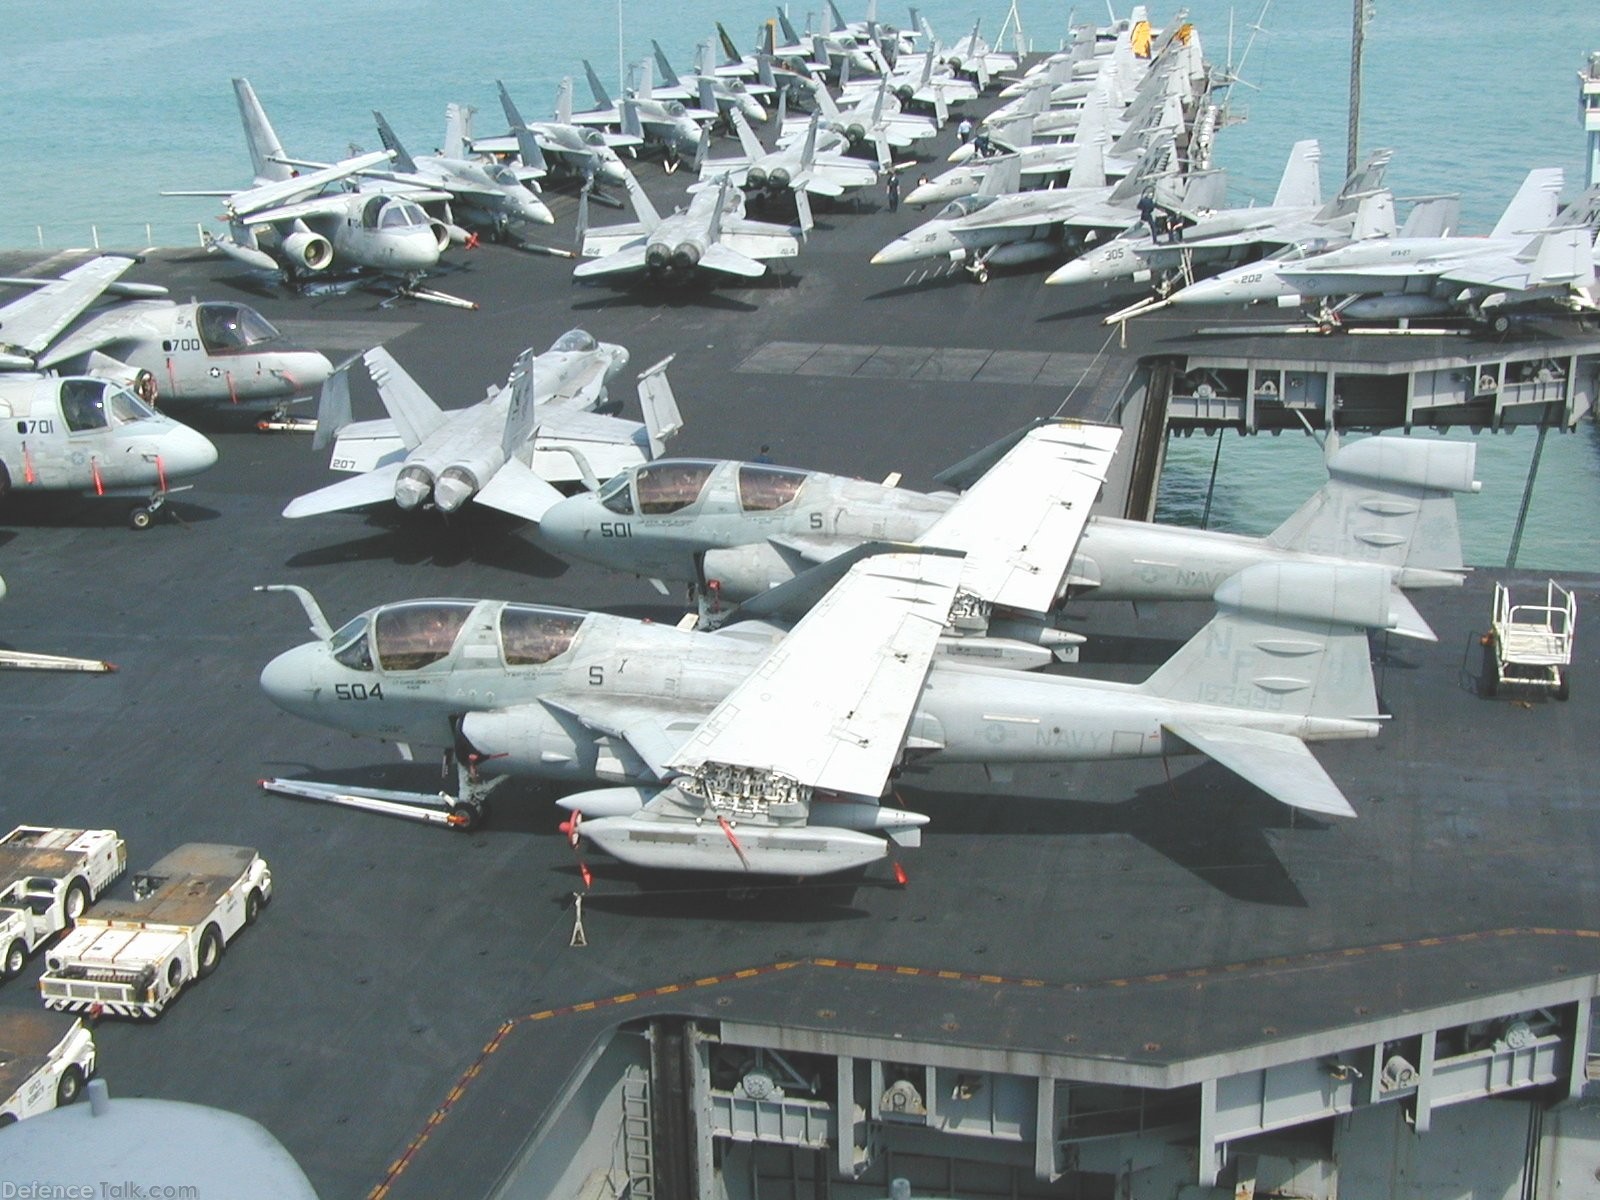 Prowlers and F/A-18C's on USS Kitty Hawk in Singapore 2002